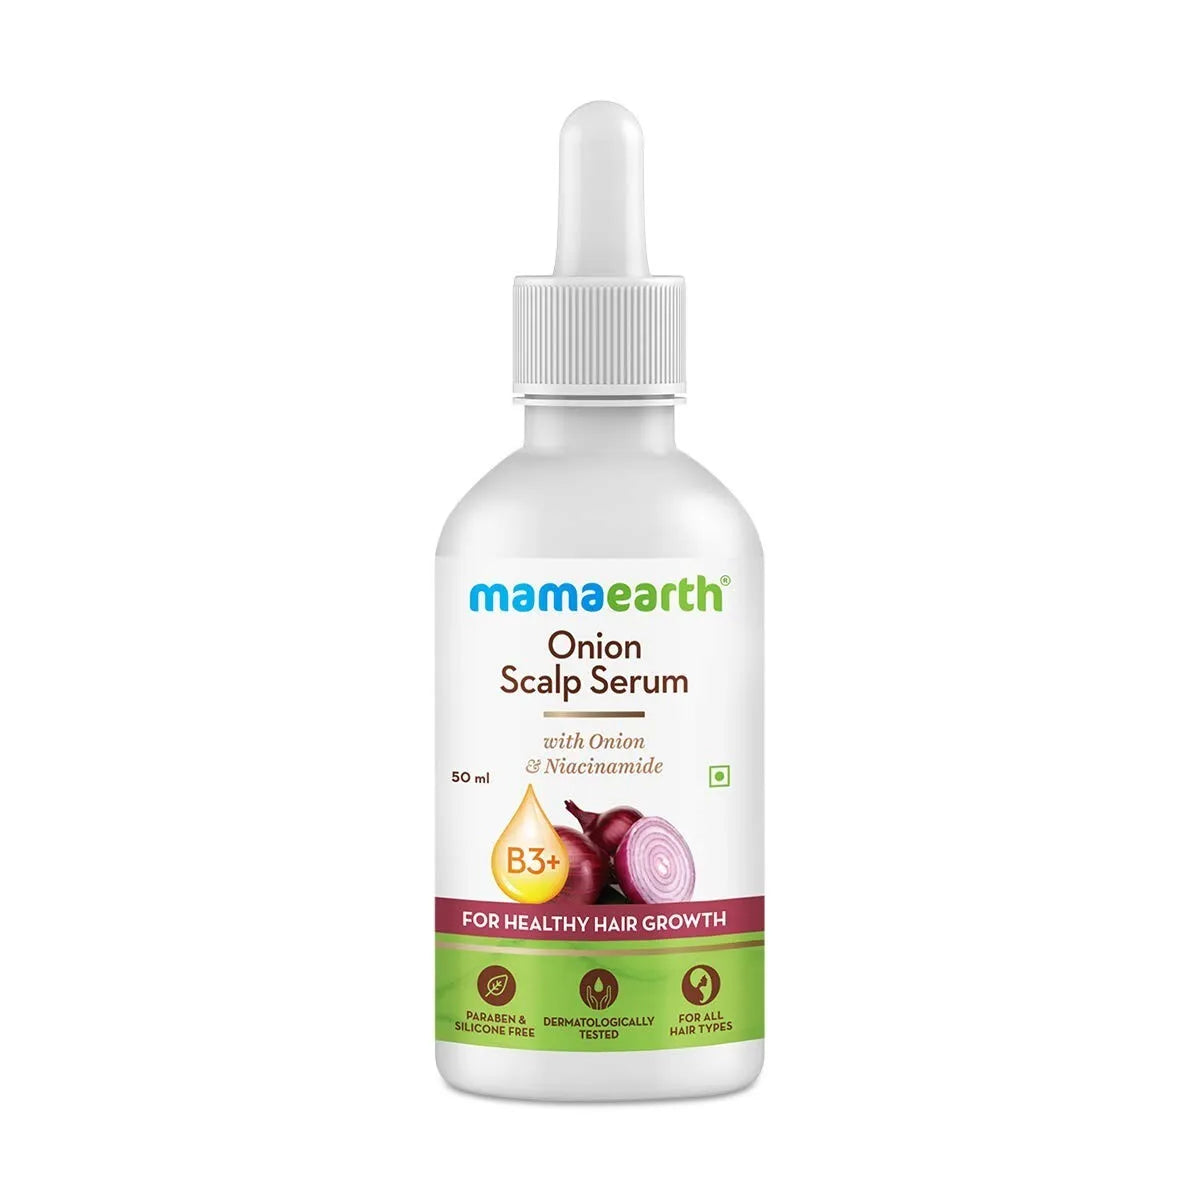 Mamaearth Onion Scalp Serum with Onion & Niacinamide for Healthy HairGrowth 50ml